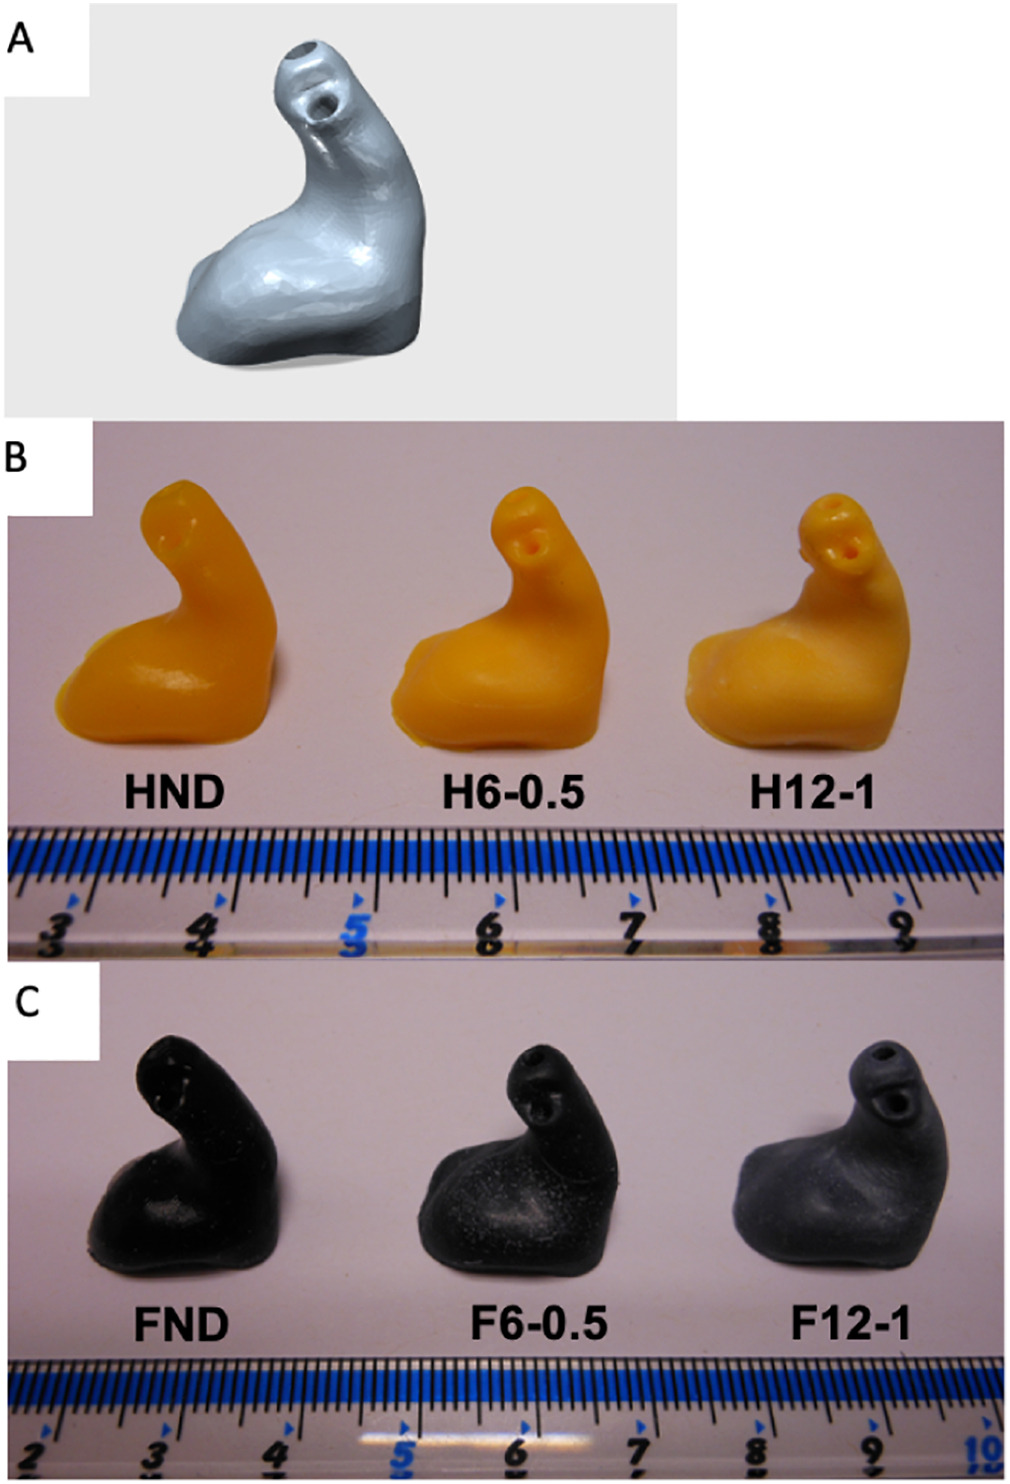 (A) 3D scan model of the hearing aid; DLP 3D printed hearing aids using (B) ENG hard resin and (C) Flexible resin. Image via ScienceDirect.